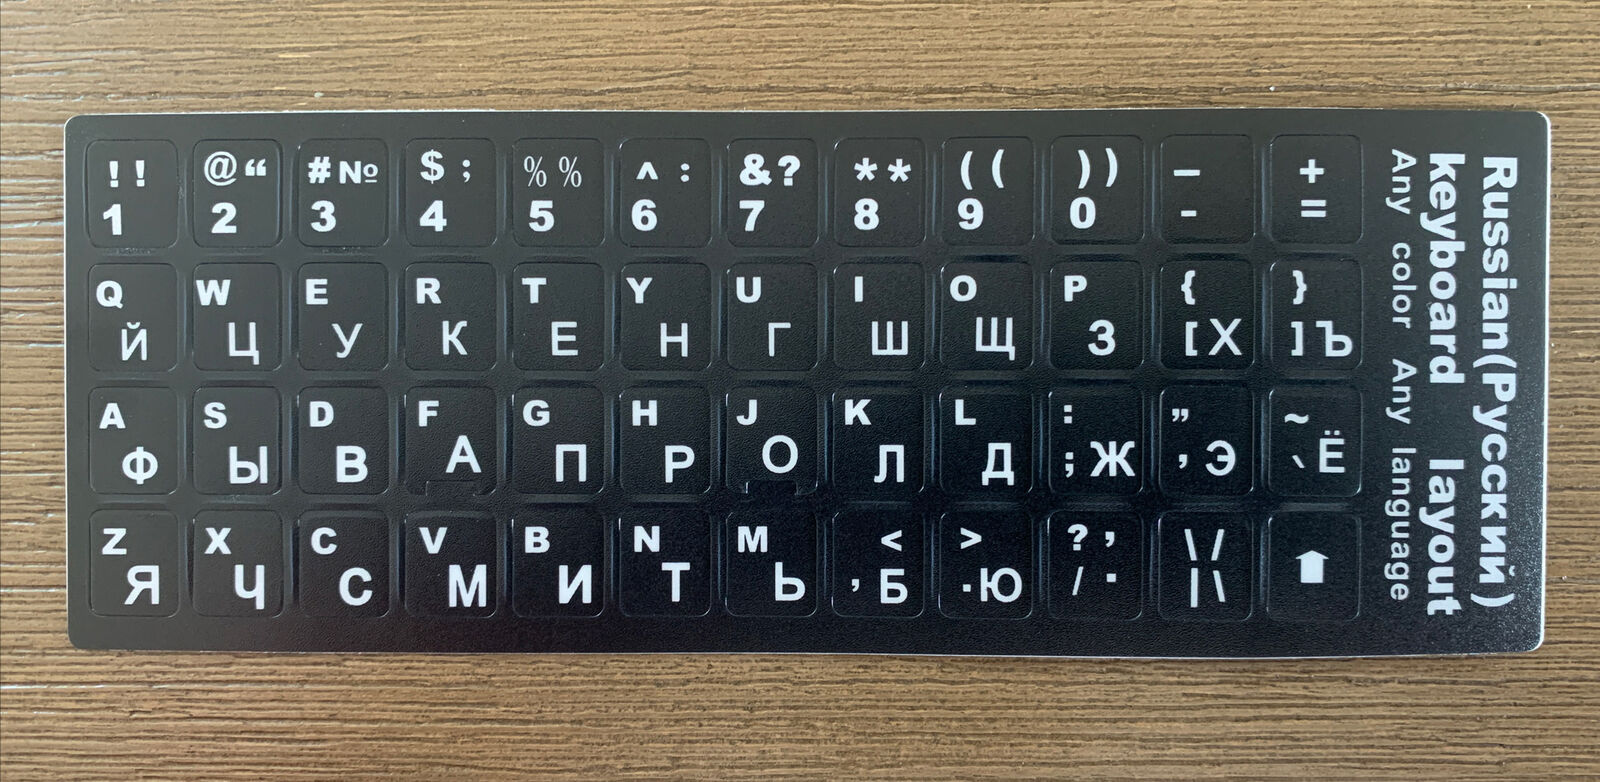 Russian Keyboard Sticker Layout (Black Background with White Letters)